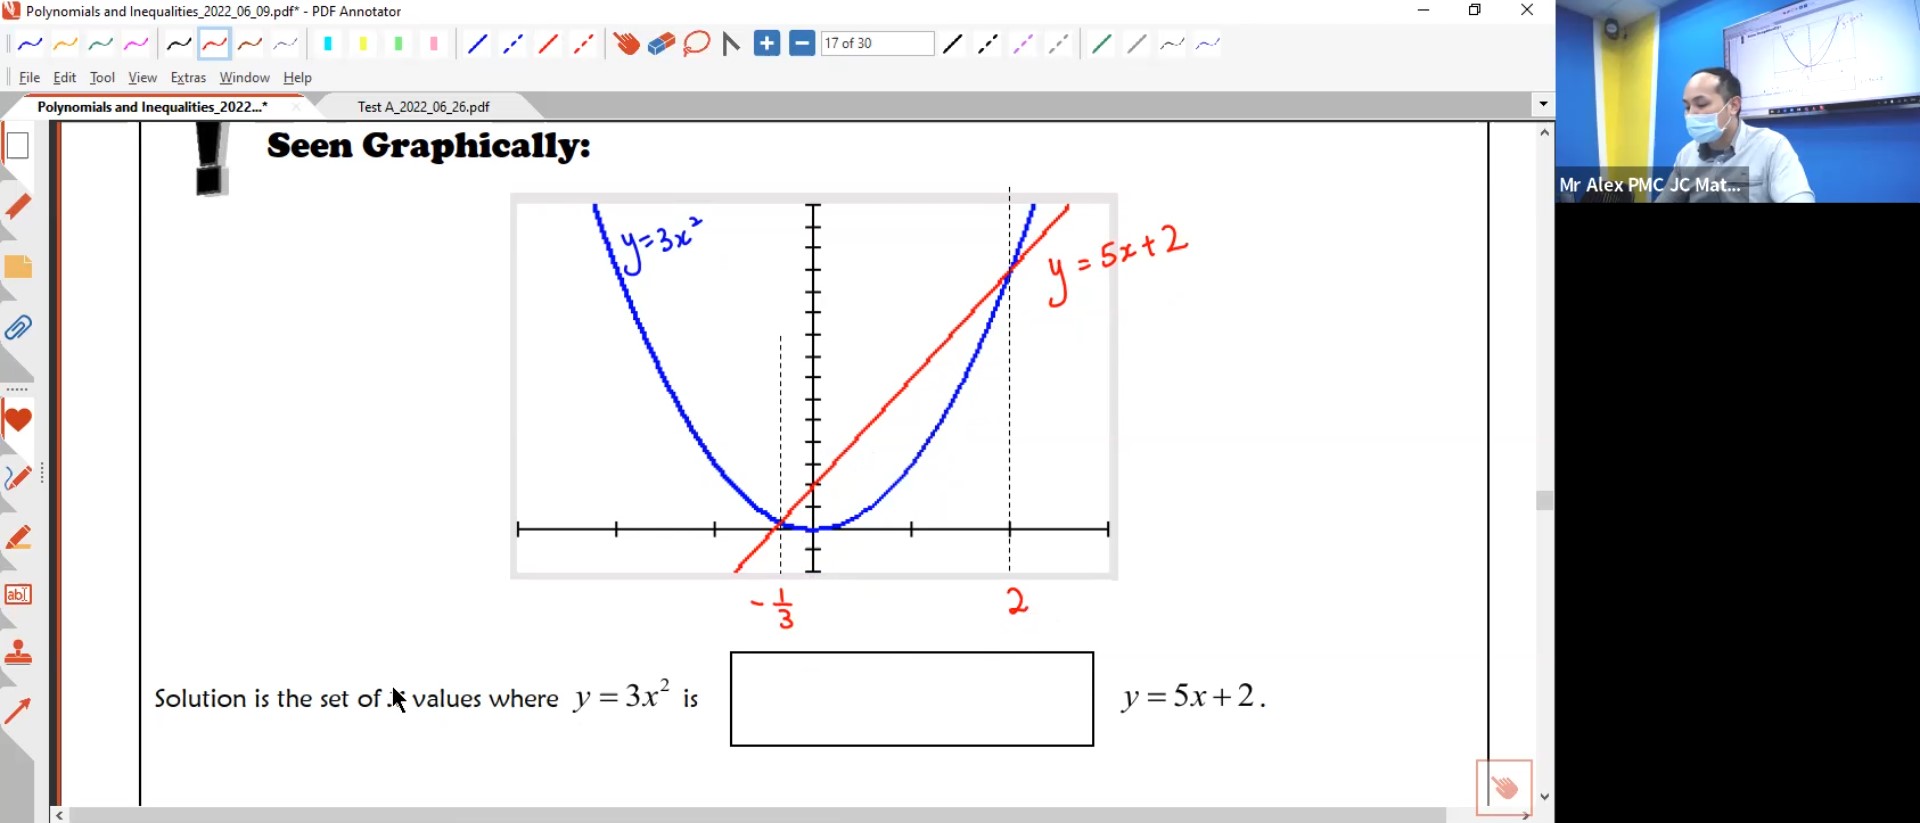 28. Polynomials and Inequalities L2 [2022]